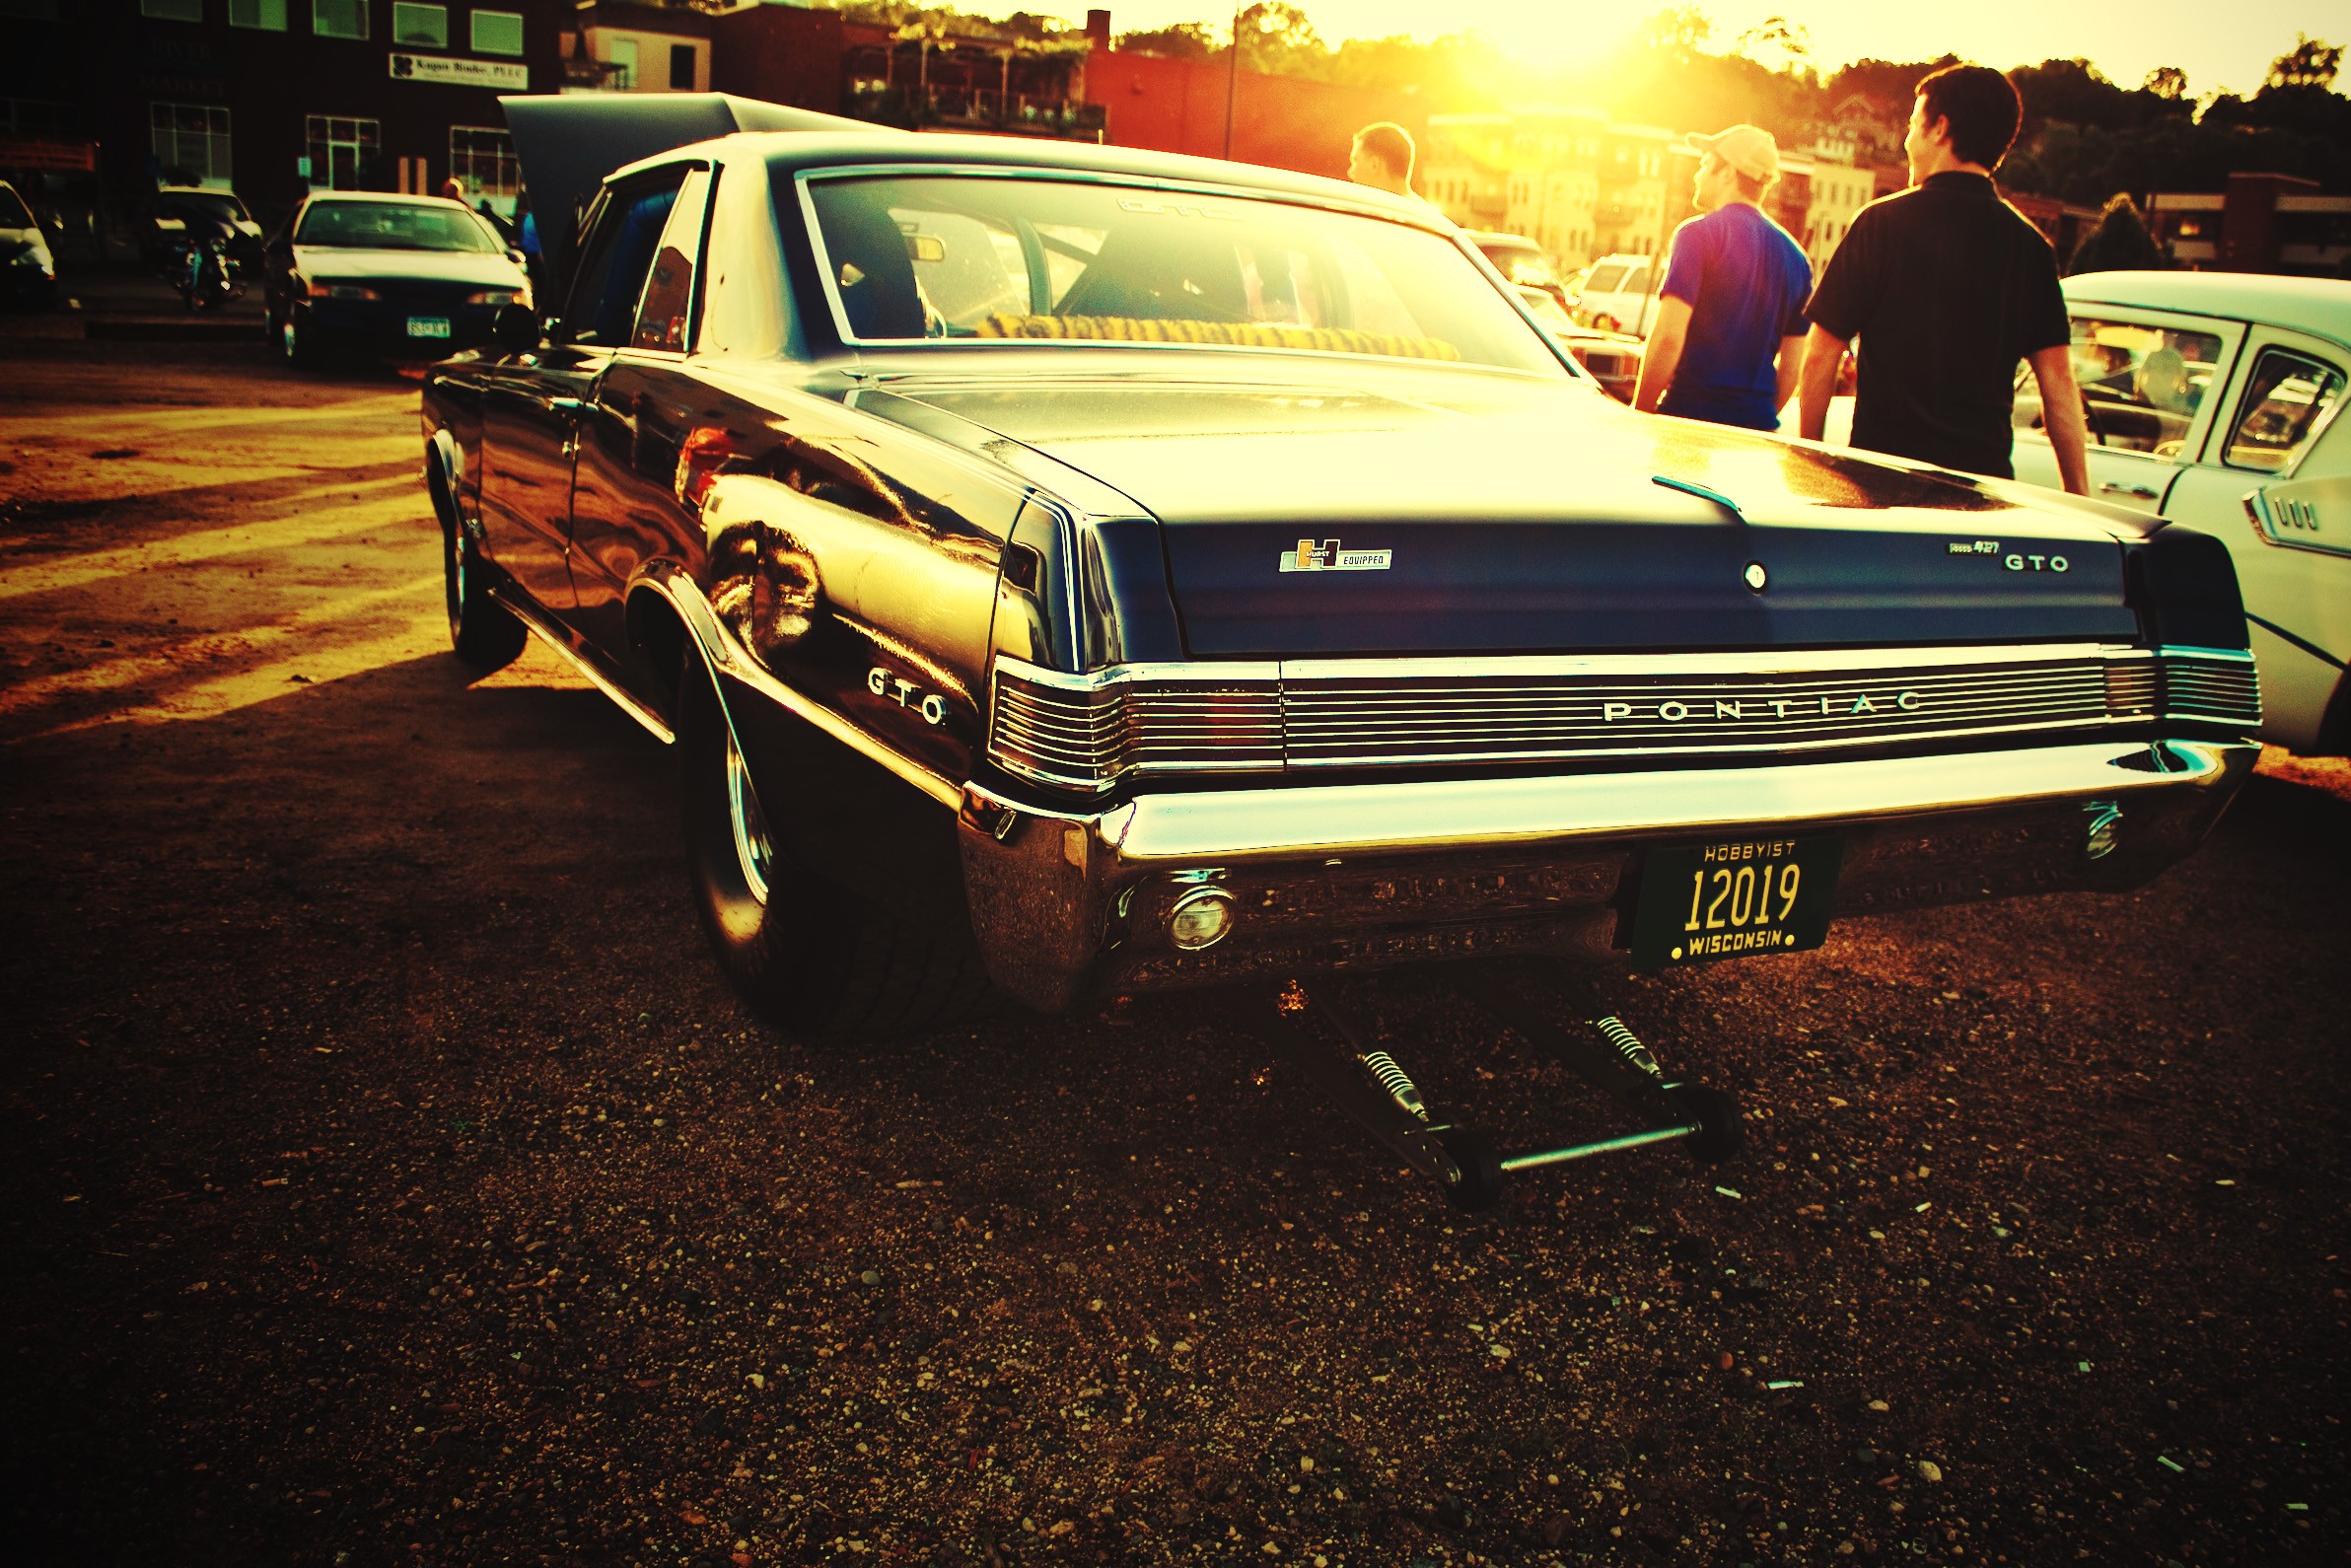 cars, photography, vehicles, Pontiac GTO, old cars, american cars, street wallpaper